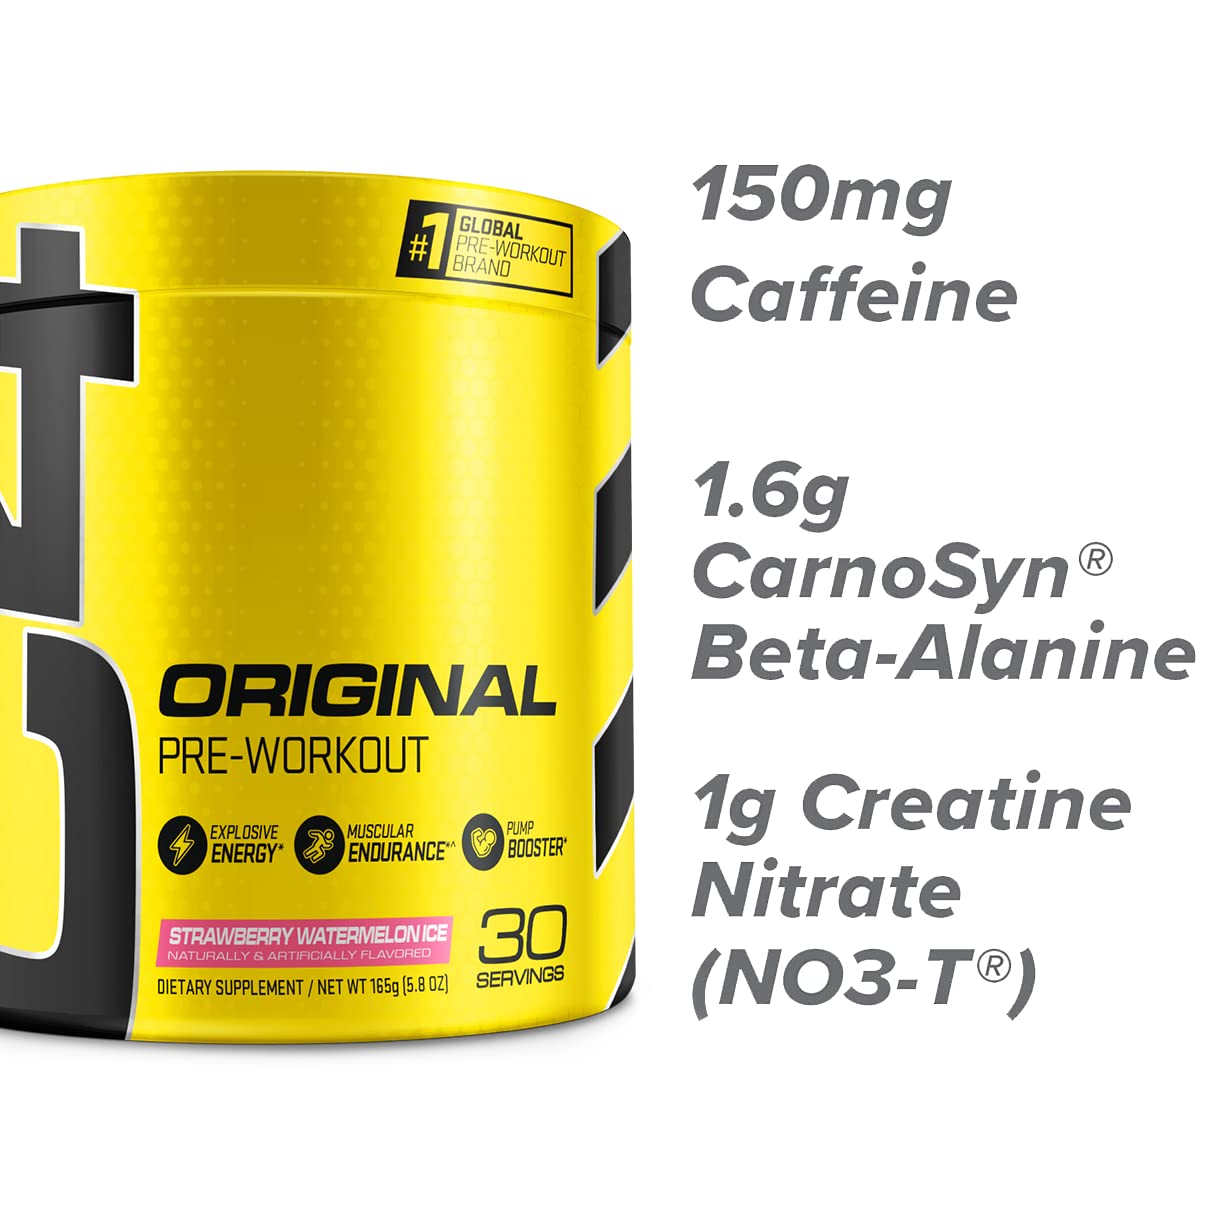 Cellucor C4 Original Pre Workout Powder Strawberry Watermelon Ice Sugar Free Preworkout Energy for Men & Women 150mg Caffeine + Beta Alanine + Creatine - 30 Servings (Packaging May Vary)